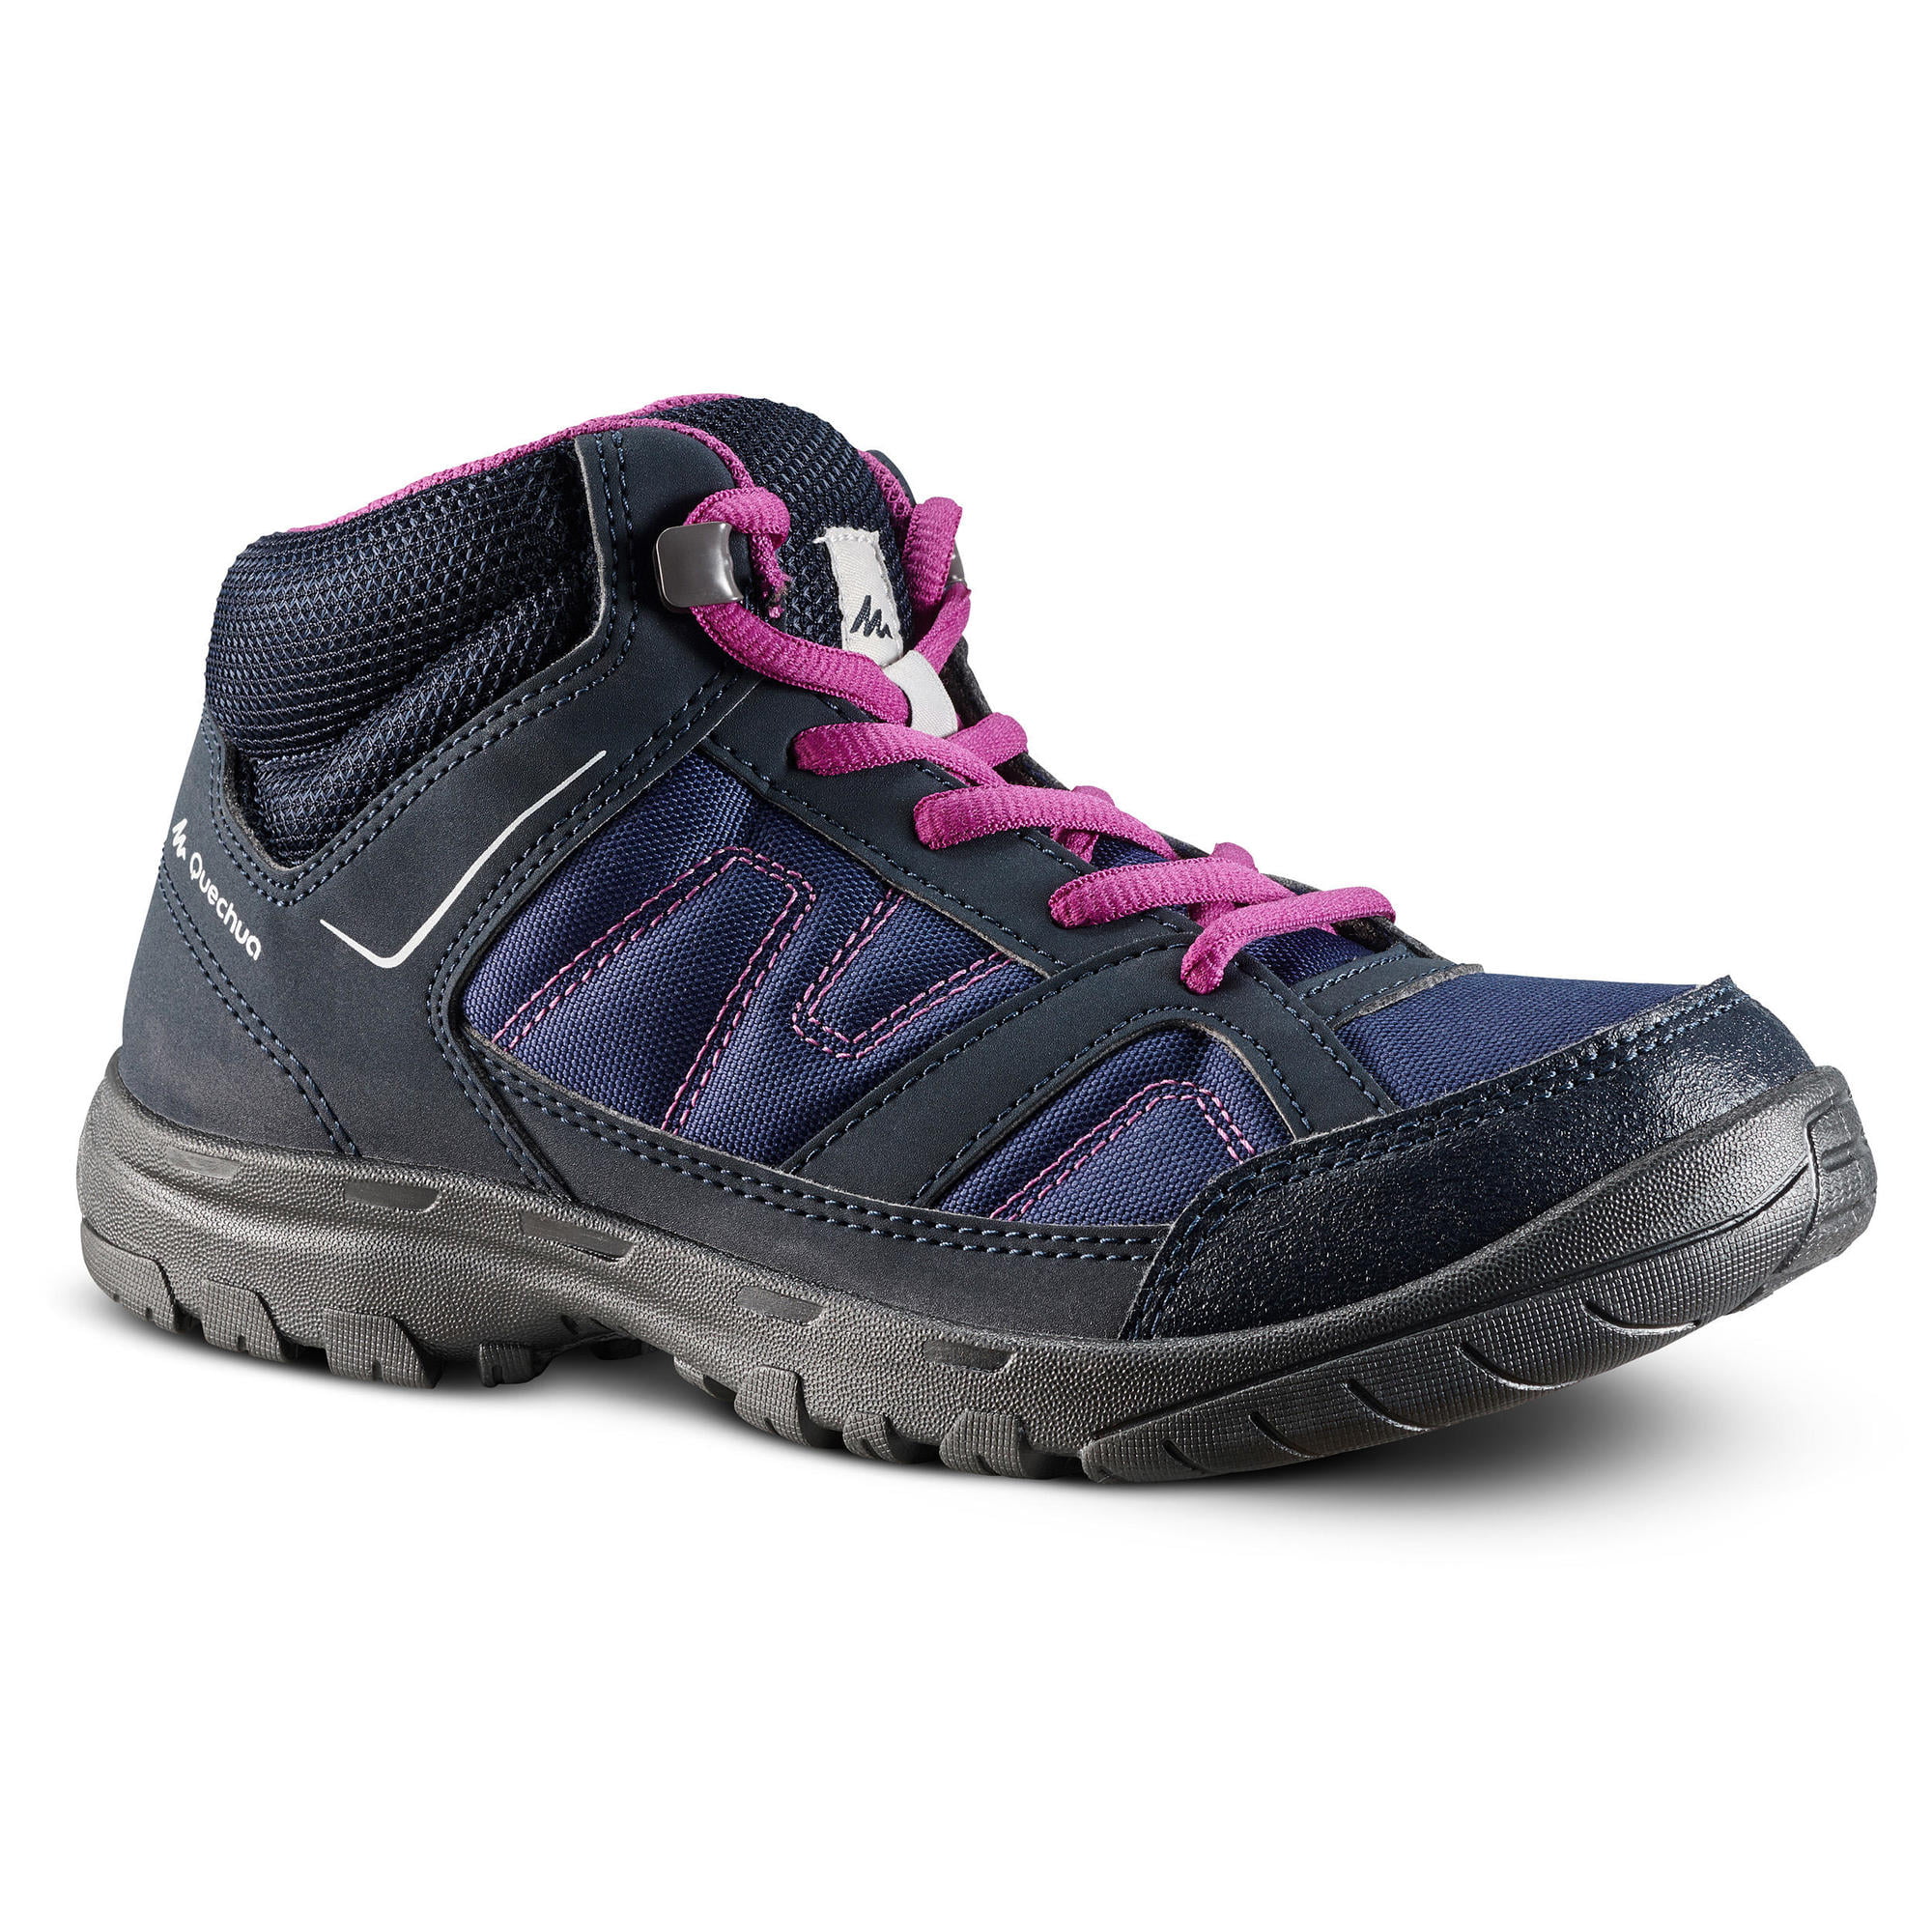 decathlon safety shoes